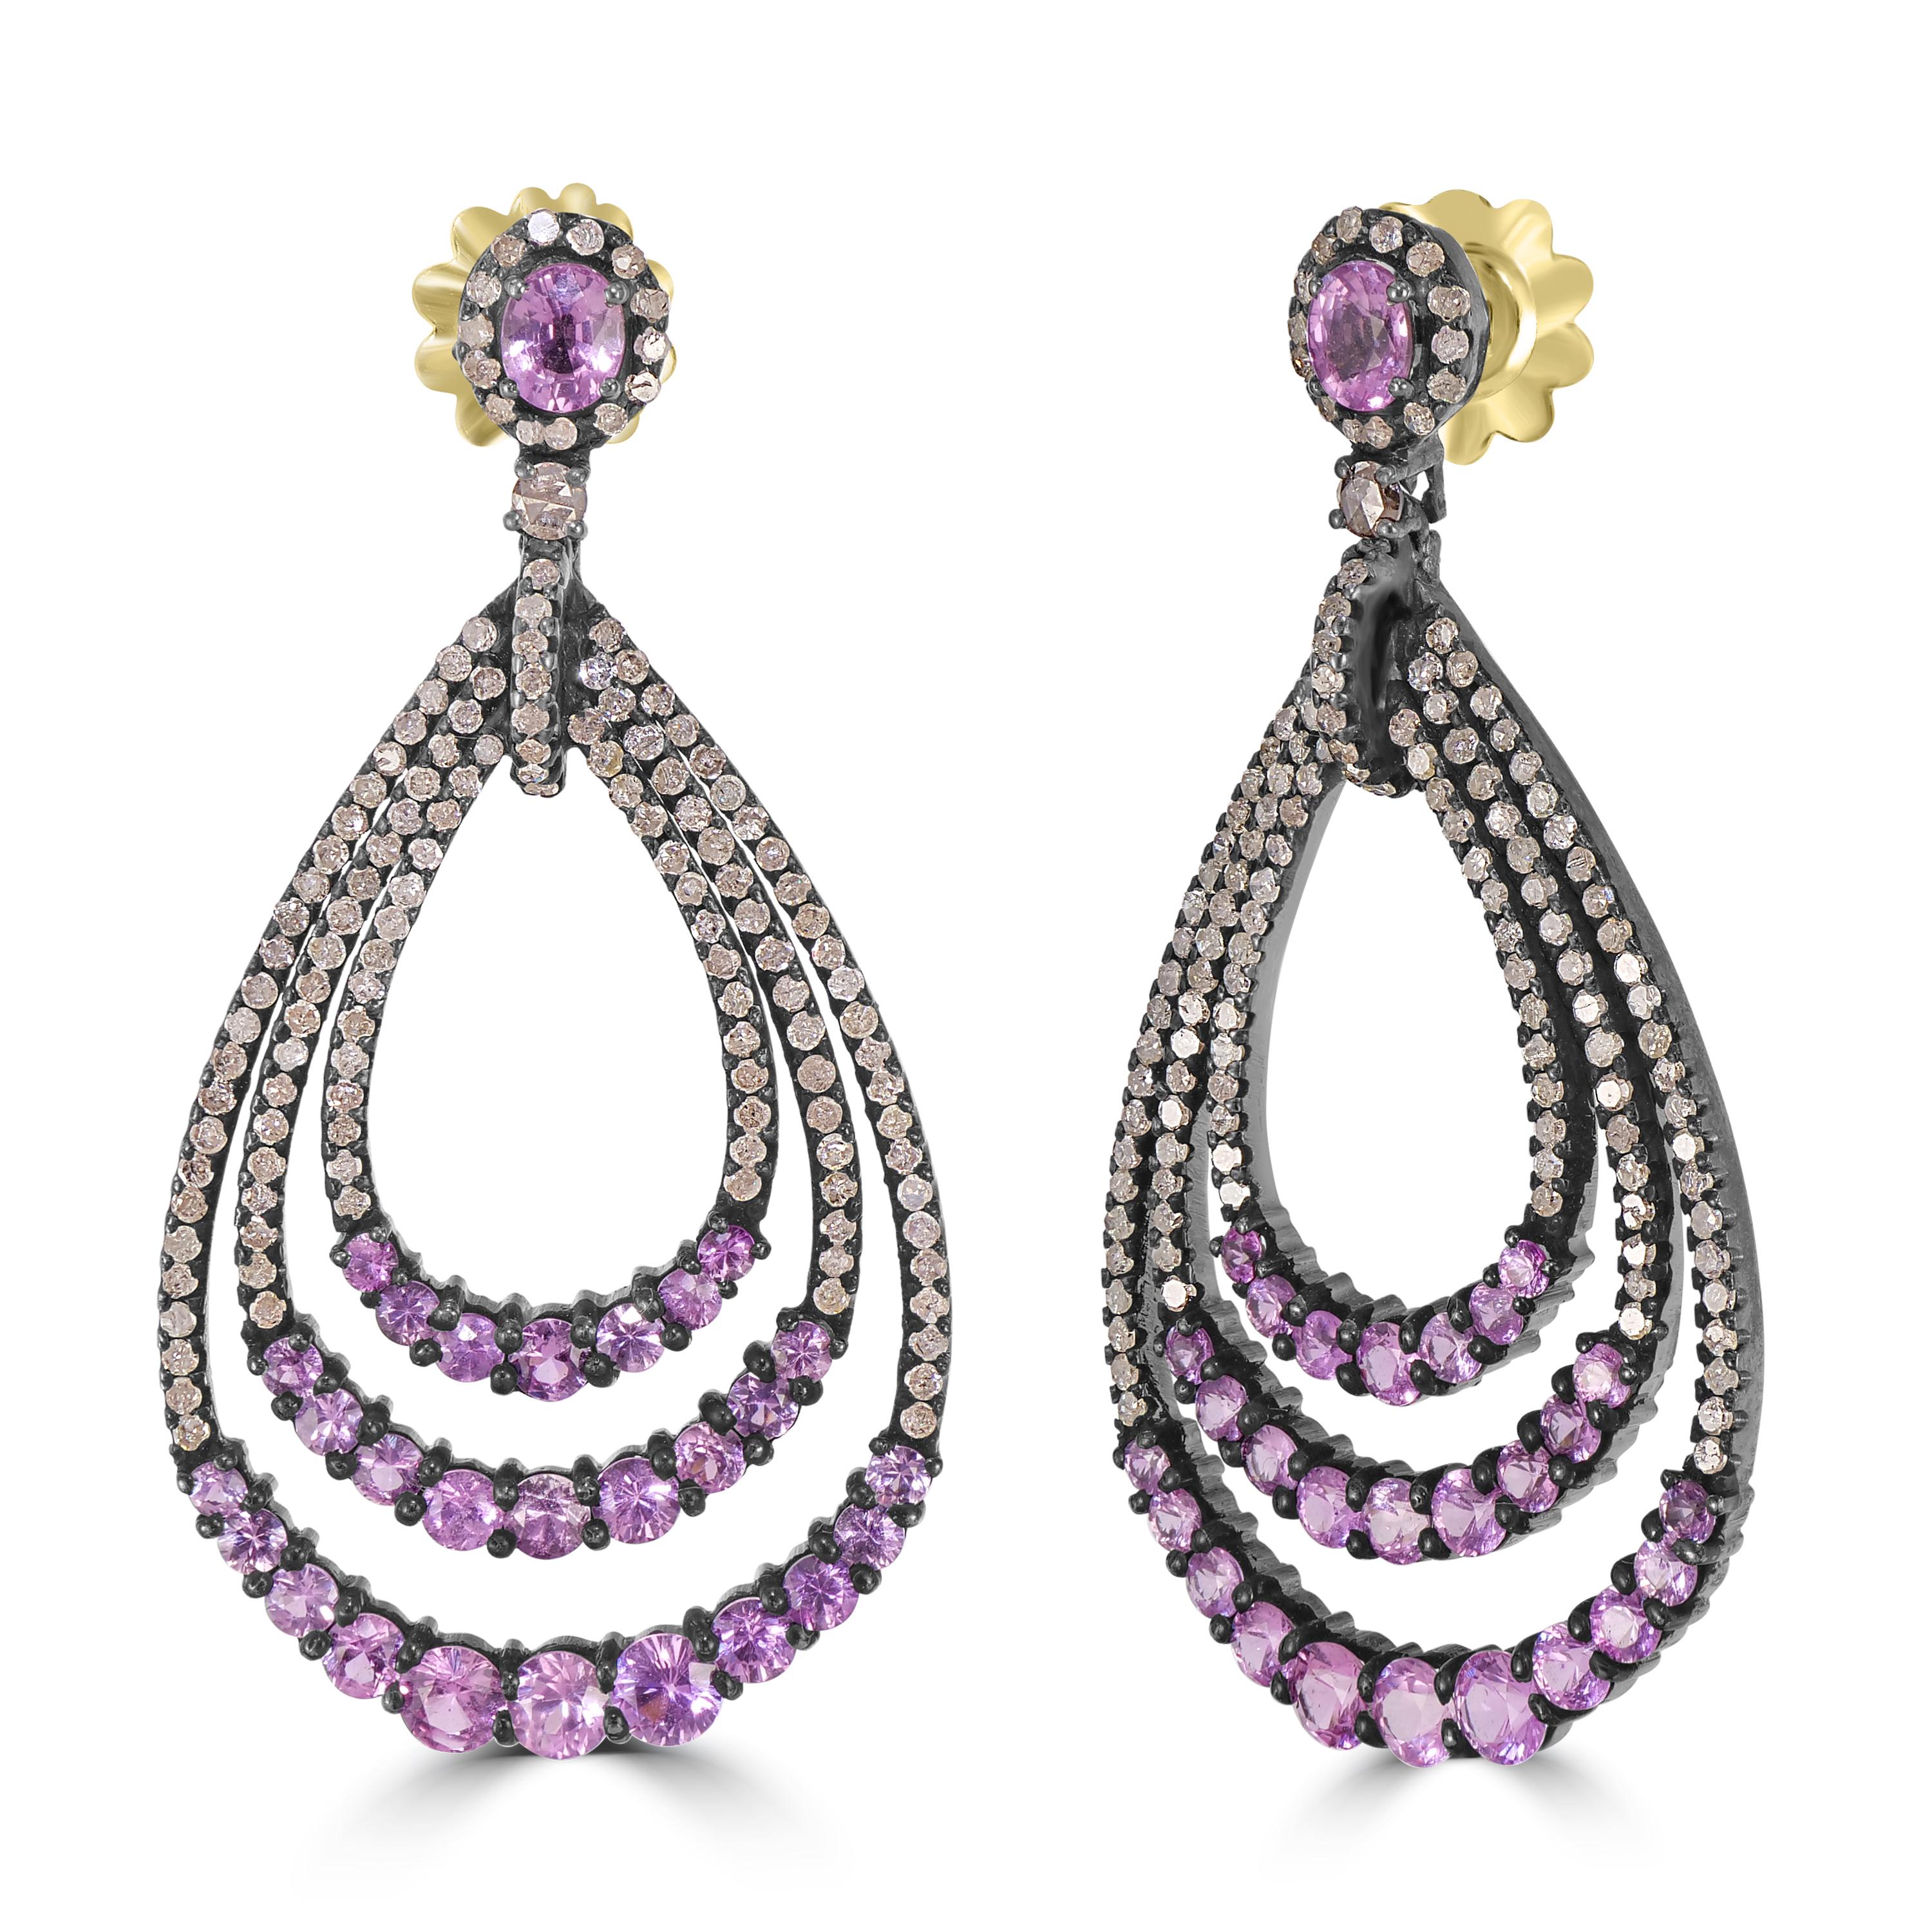 Introducing our Victorian 9.83 Cttw. Pink Sapphire and Diamond Teardrop Earrings – a dazzling testament to elegance and sophistication.

Crafted with exquisite detail, these earrings feature a captivating open-work, teardrop design adorned with